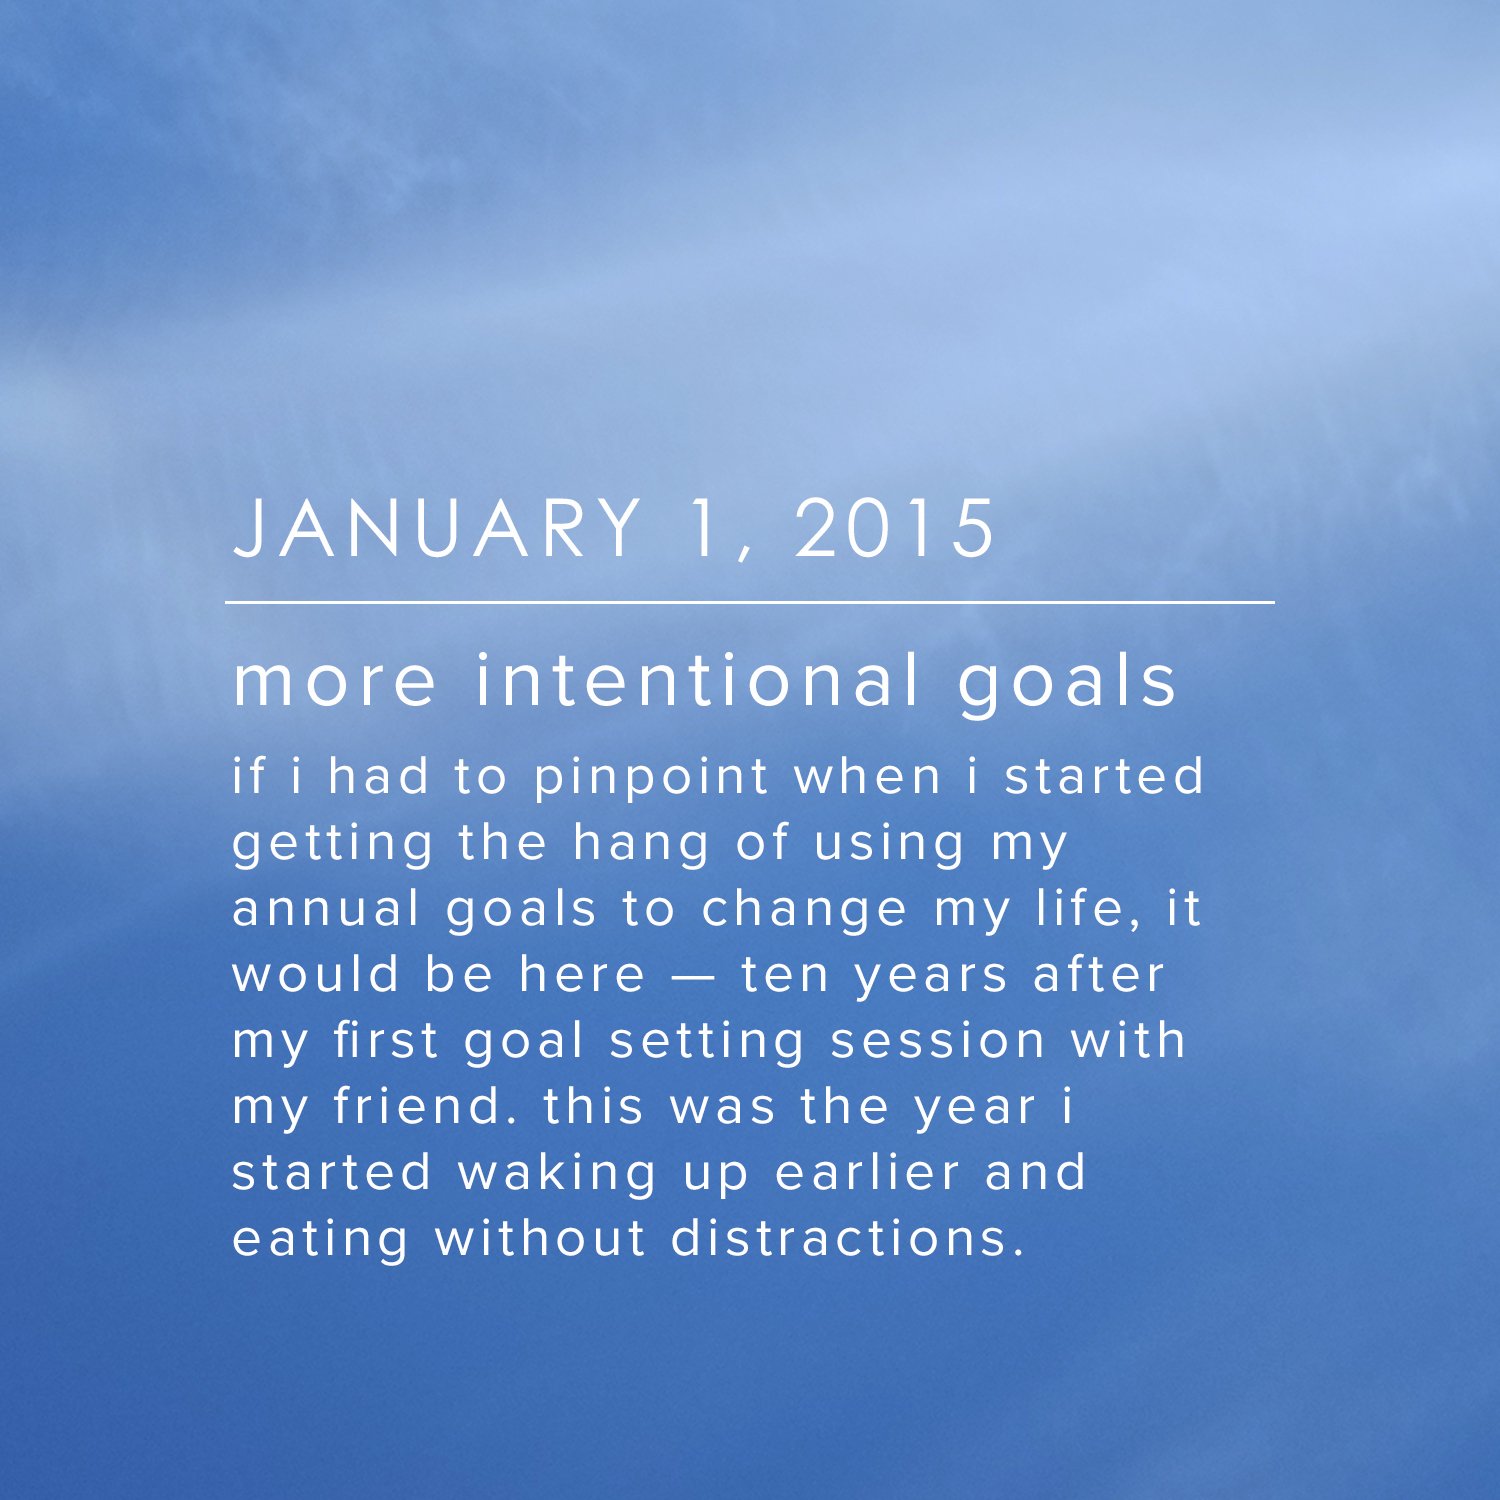 January 1, 2015 - more intentional goals